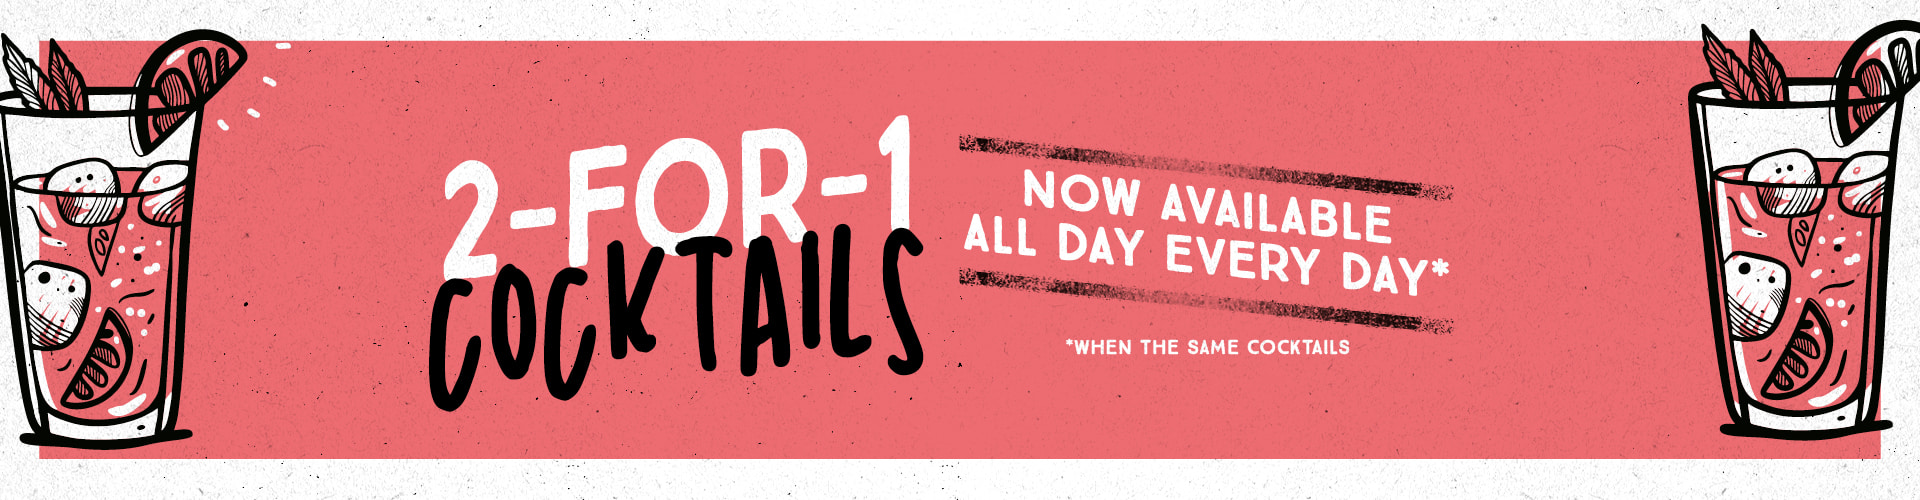 2-for-1 cocktails. Now available all day everyday!